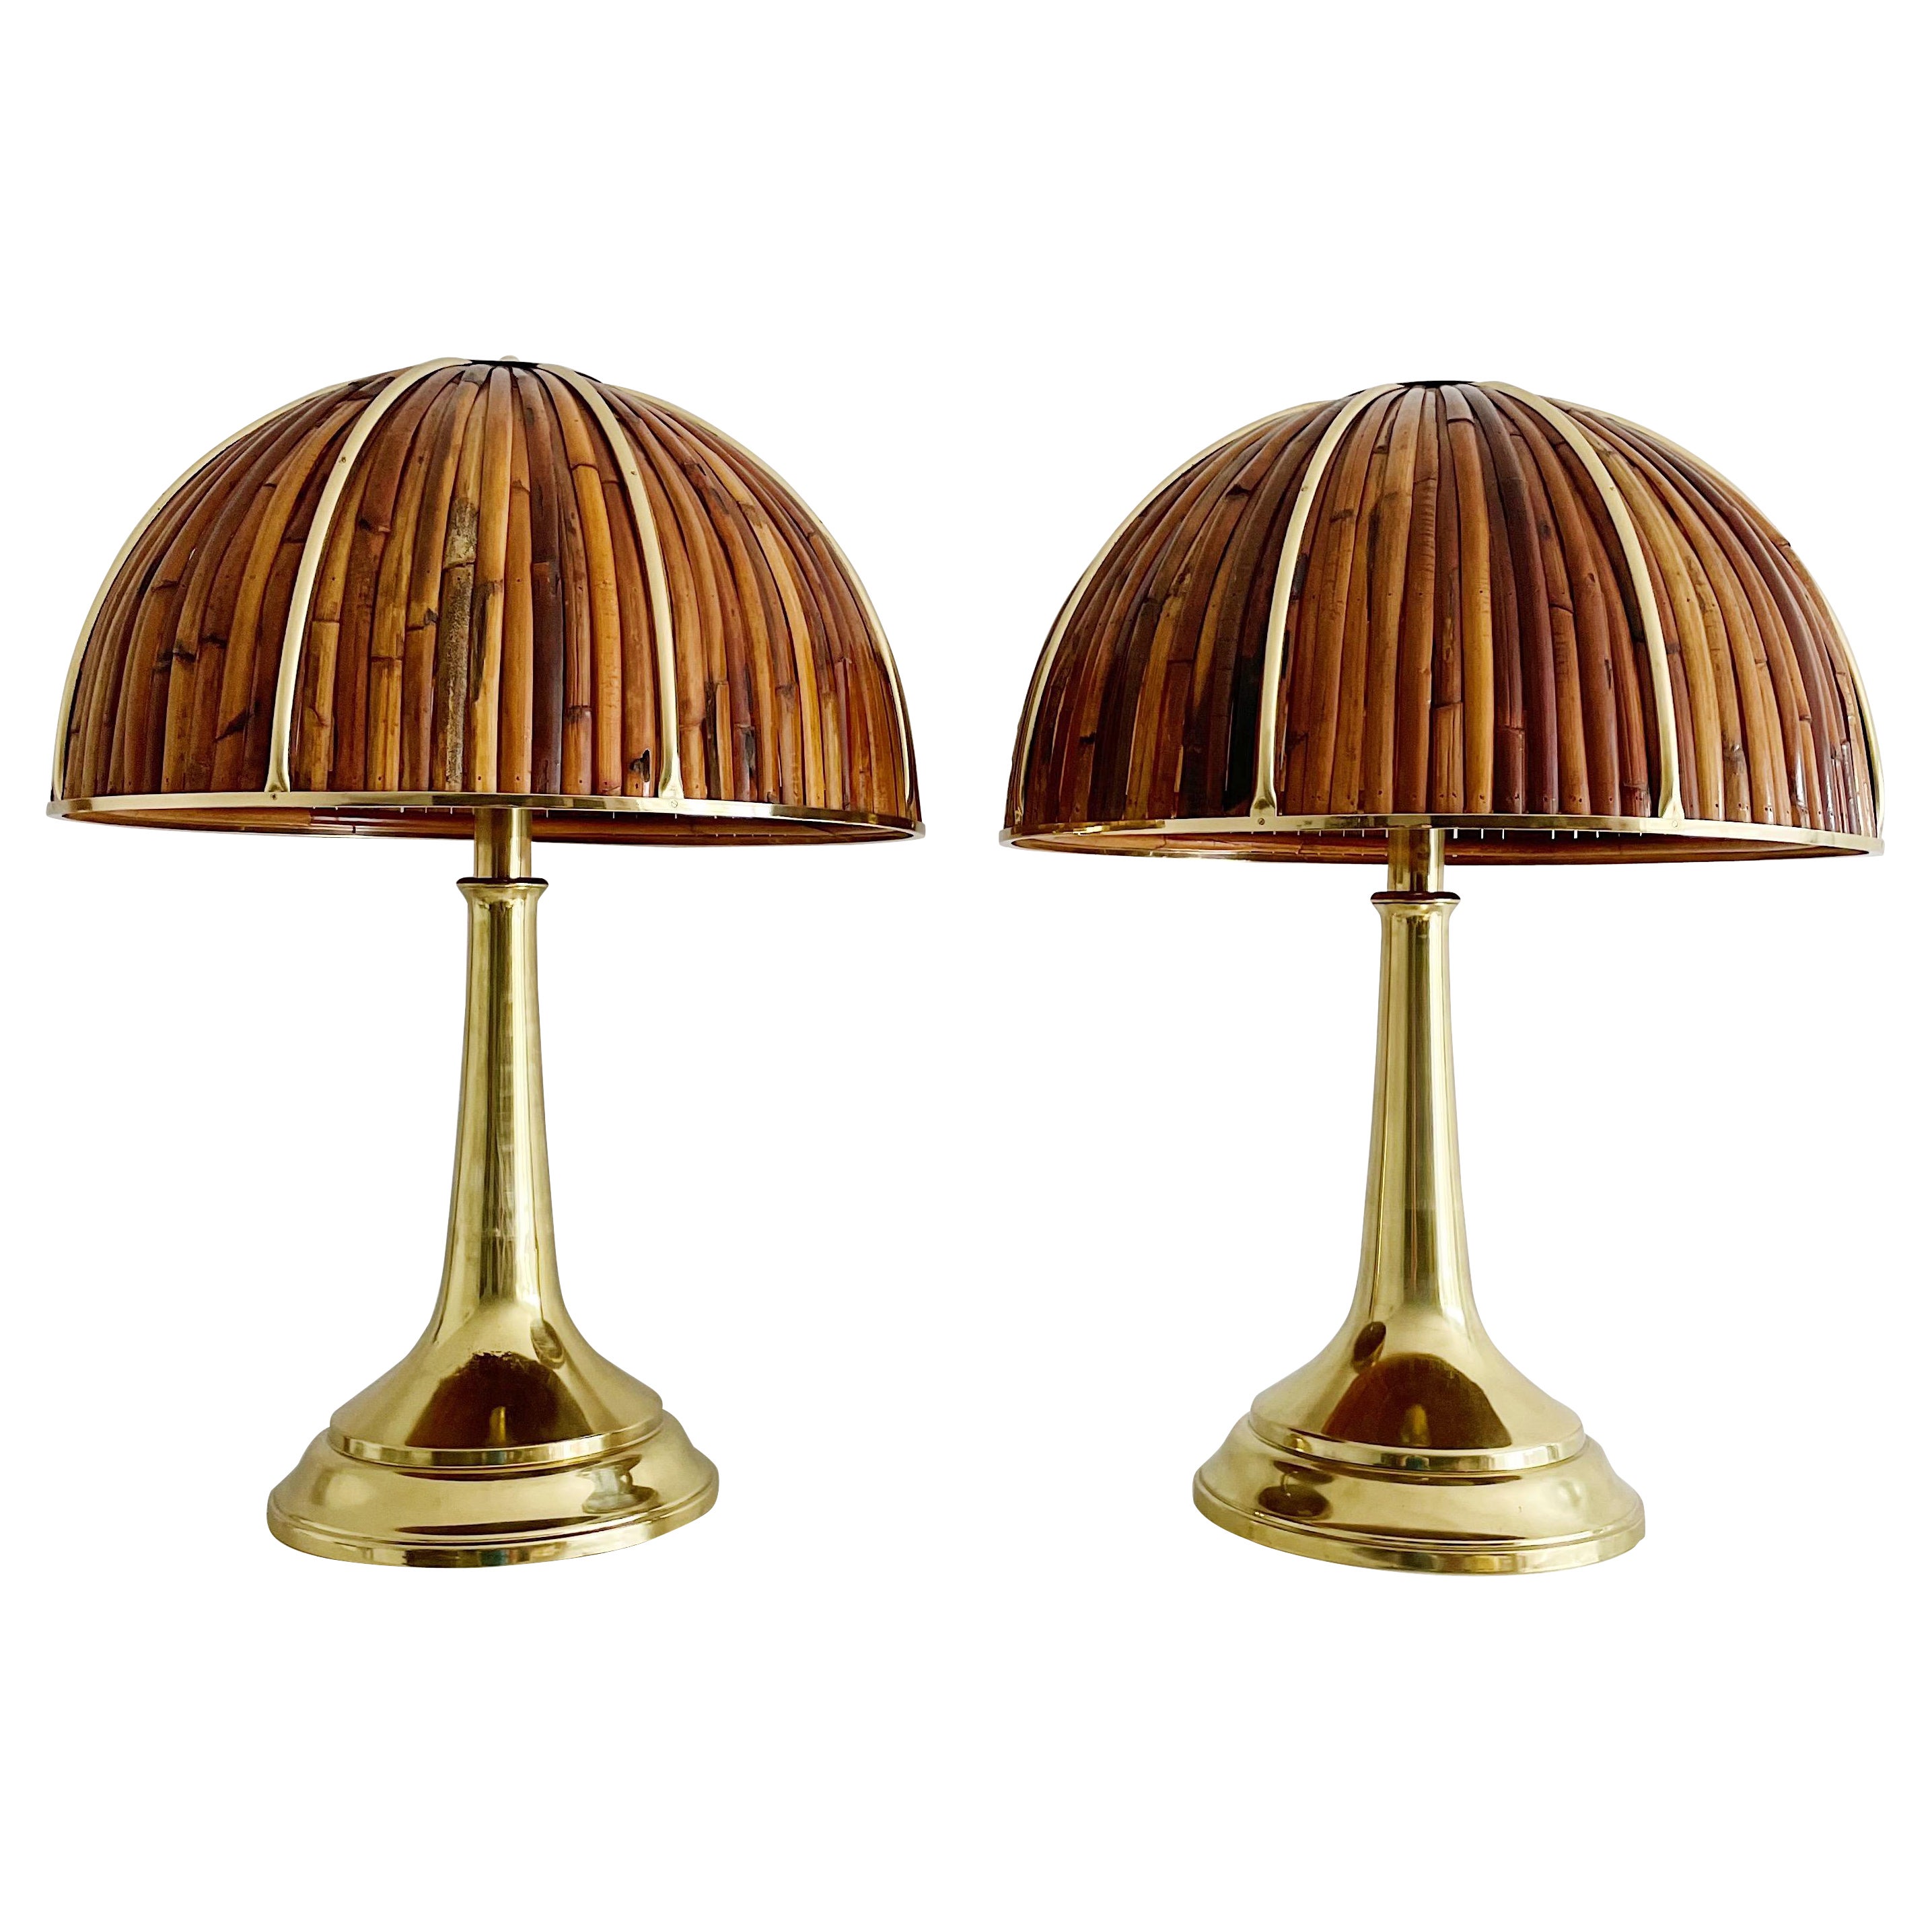 Pair of Gabriella Crespi Large Fungo Table Lamps, Rising Sun Series, 1973, Italy